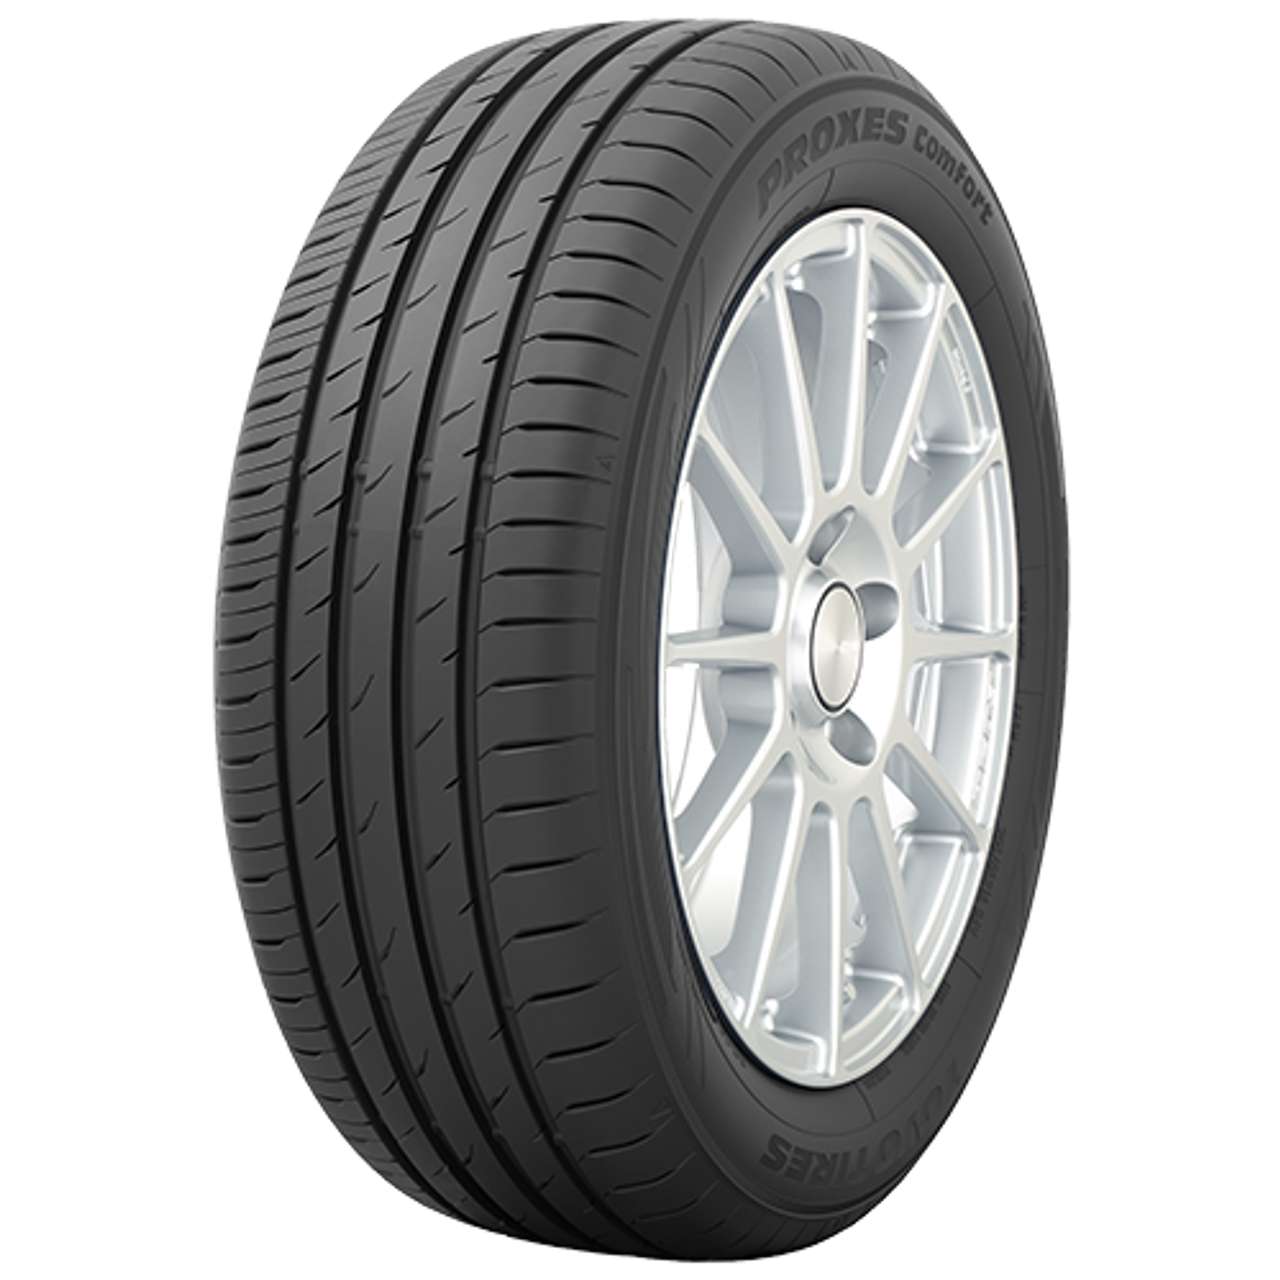 TOYO PROXES COMFORT 185/55R15 82H BSW